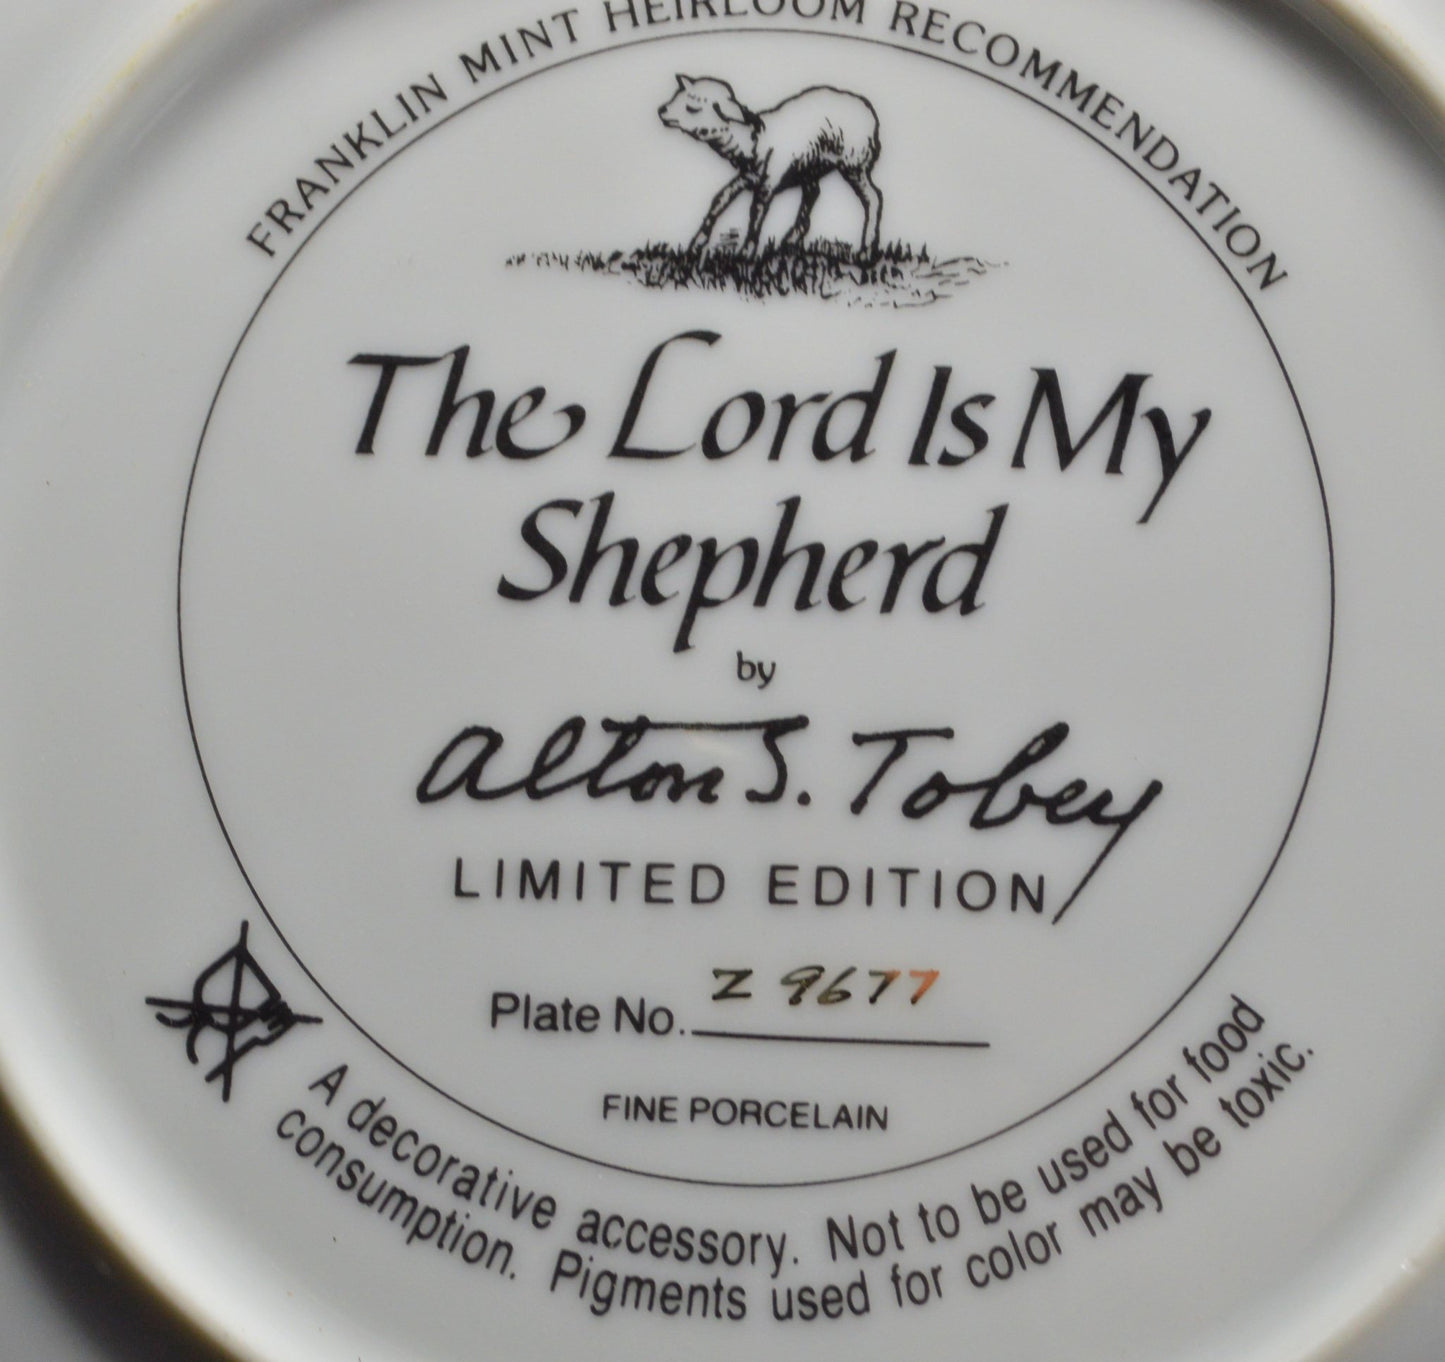 FRANKLIN MINT HEIRLOOM RECOMMENDATION COLLECTOR PLATE THE LORD IS MY SHEPHERD - TMD167207